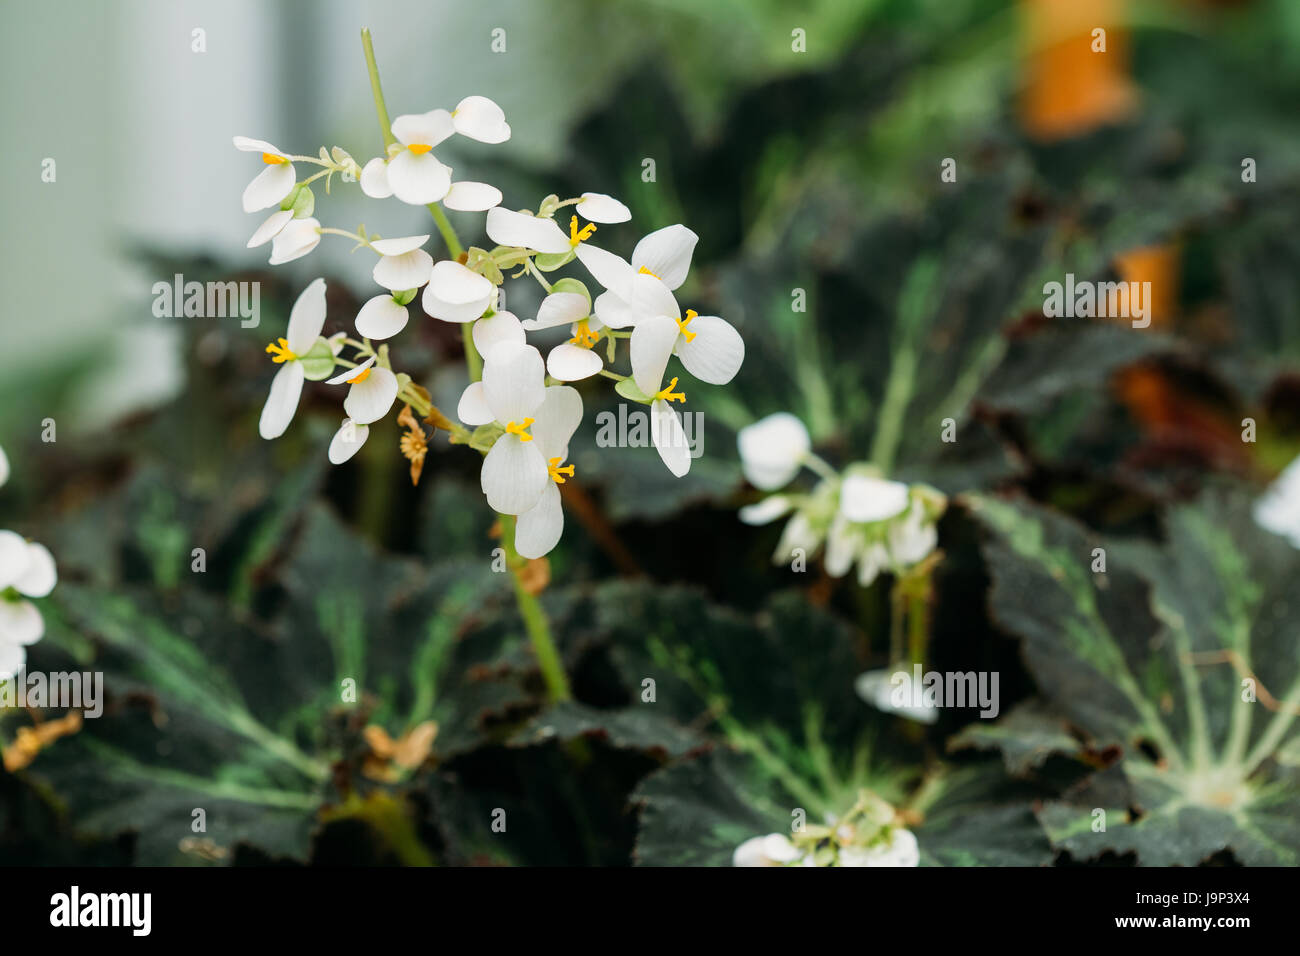 Green Leaves And Flower Of Plant Begonia Rex Putz, Commonly Known As King Begonia, Rex Begonia, Is A Rhizomatous Perennial From North India. It Is A P Stock Photo